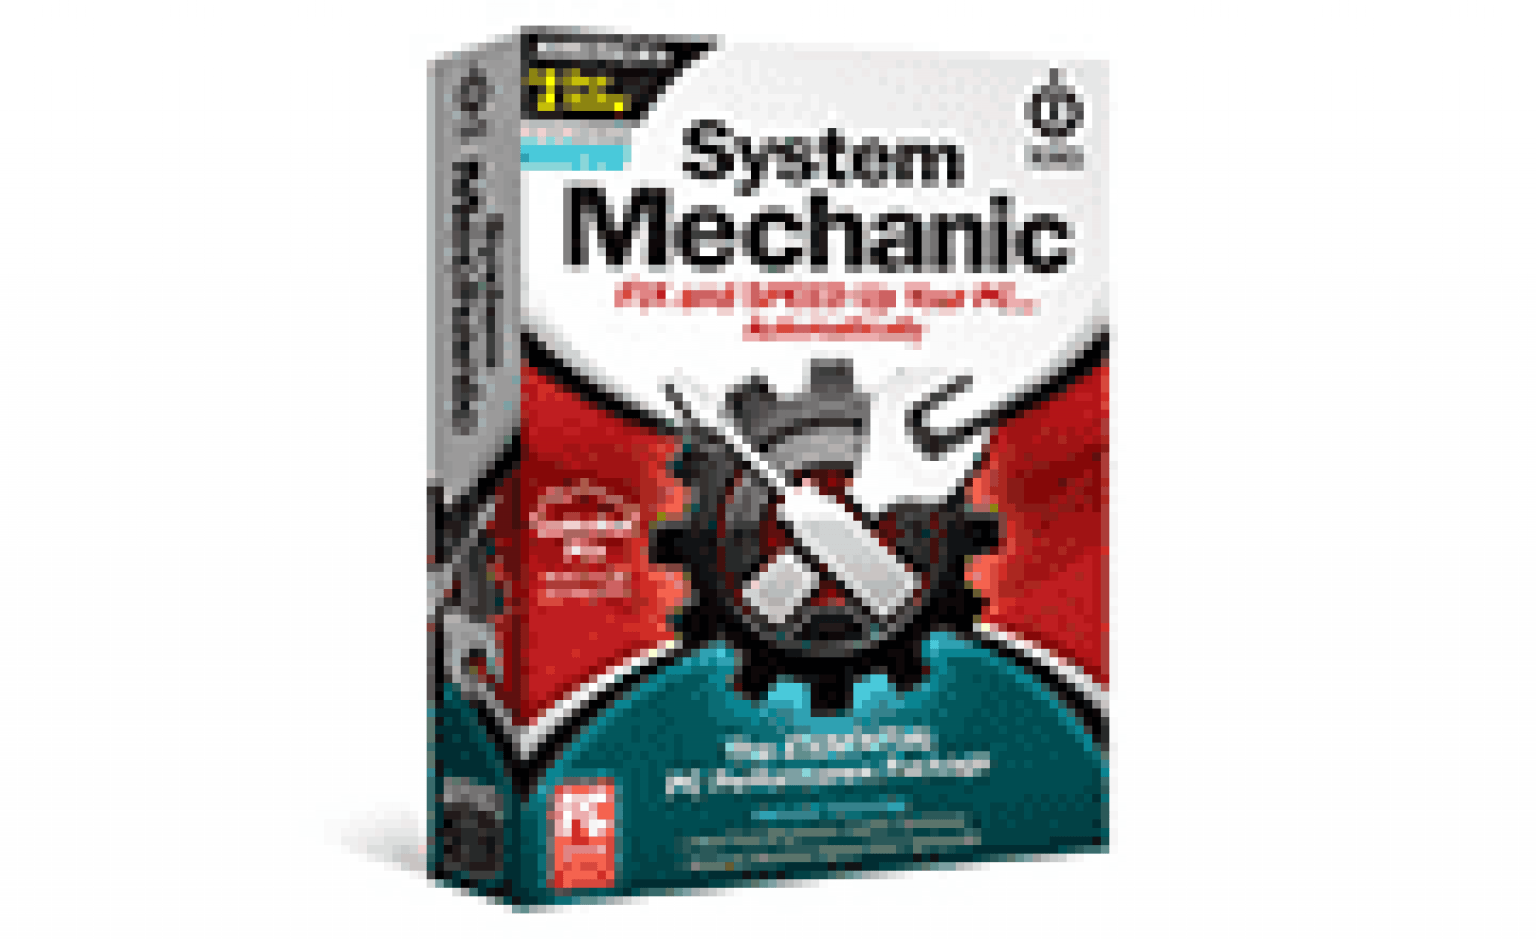 iolo system mechanic pro download cheap